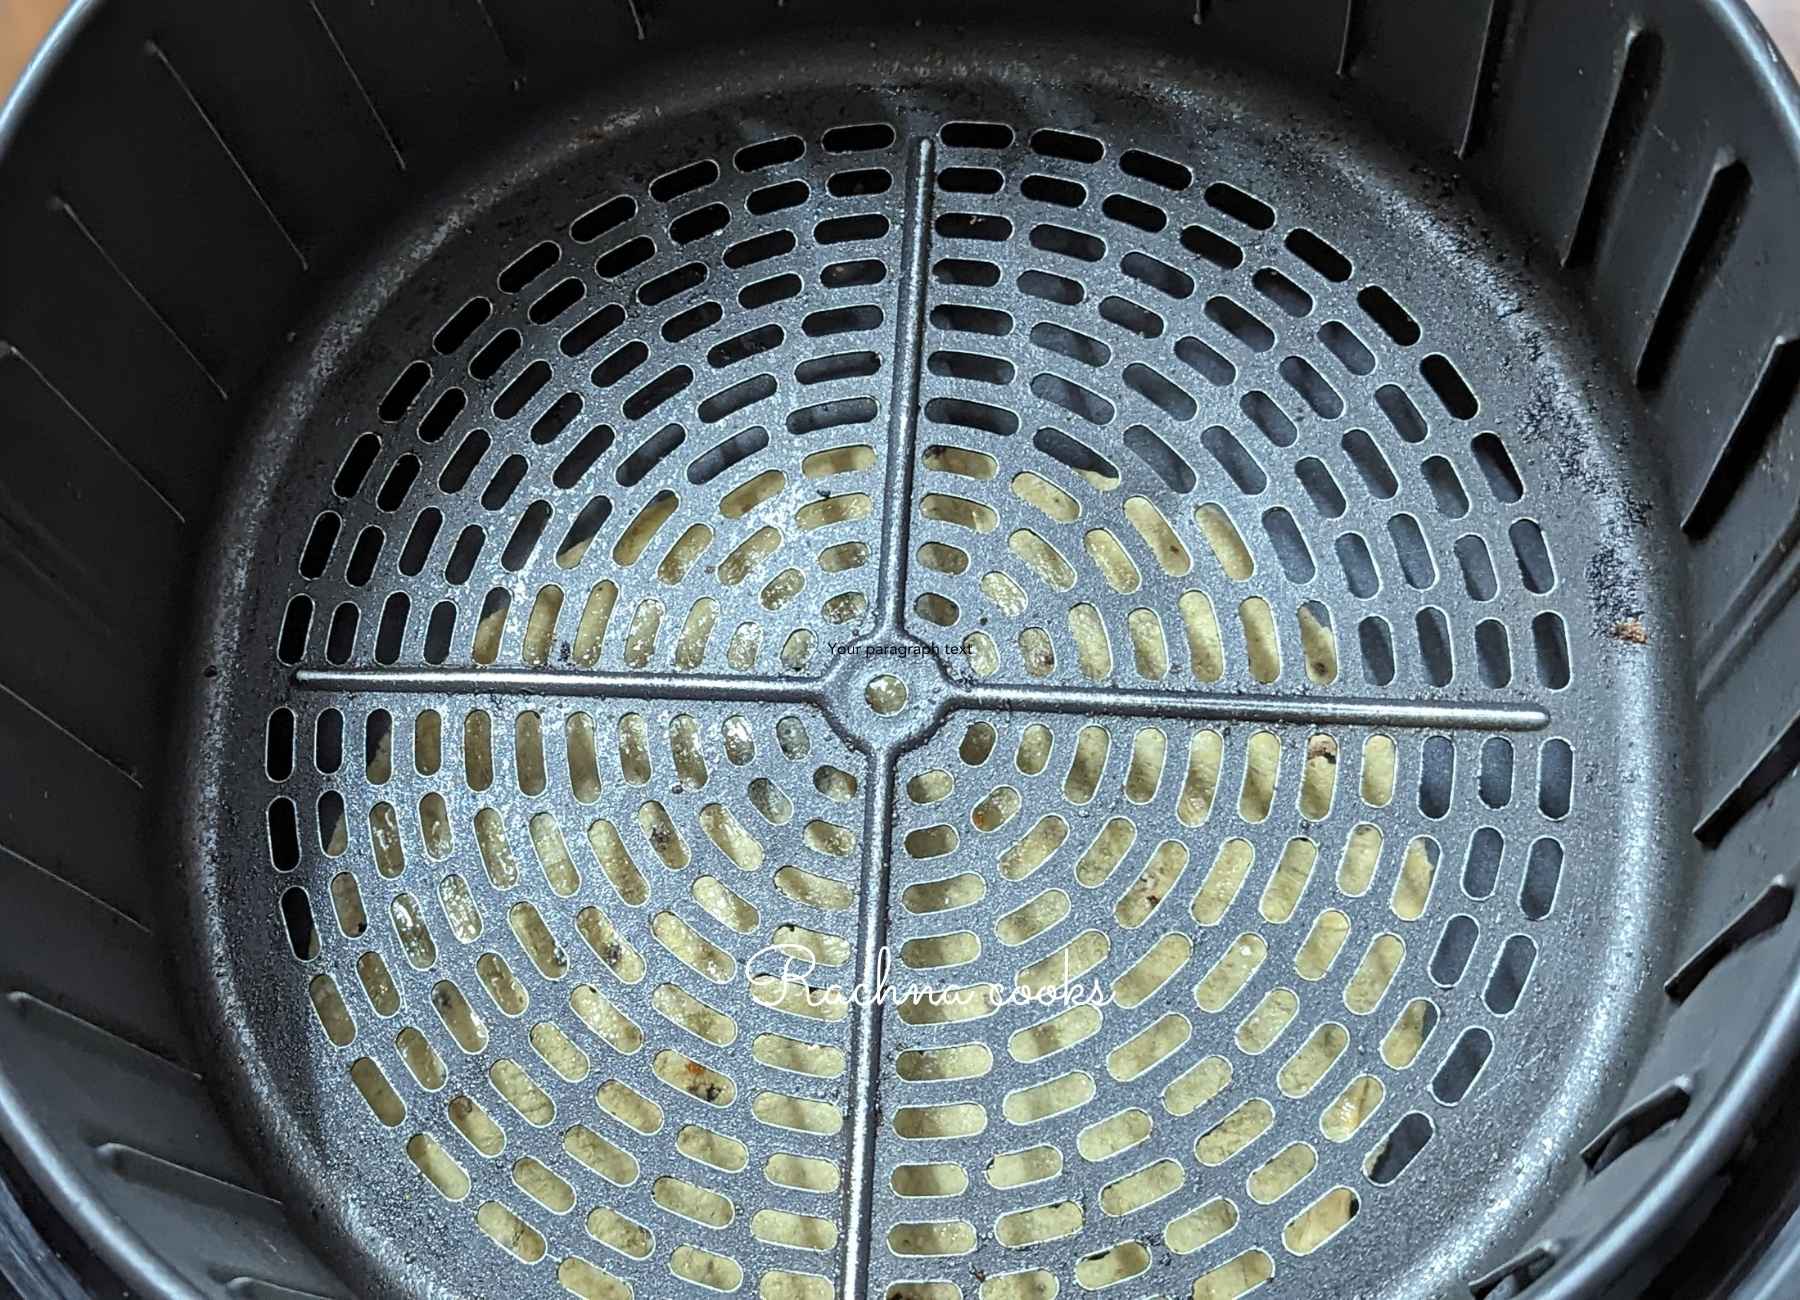 Air fryer basket closed with papad placed below